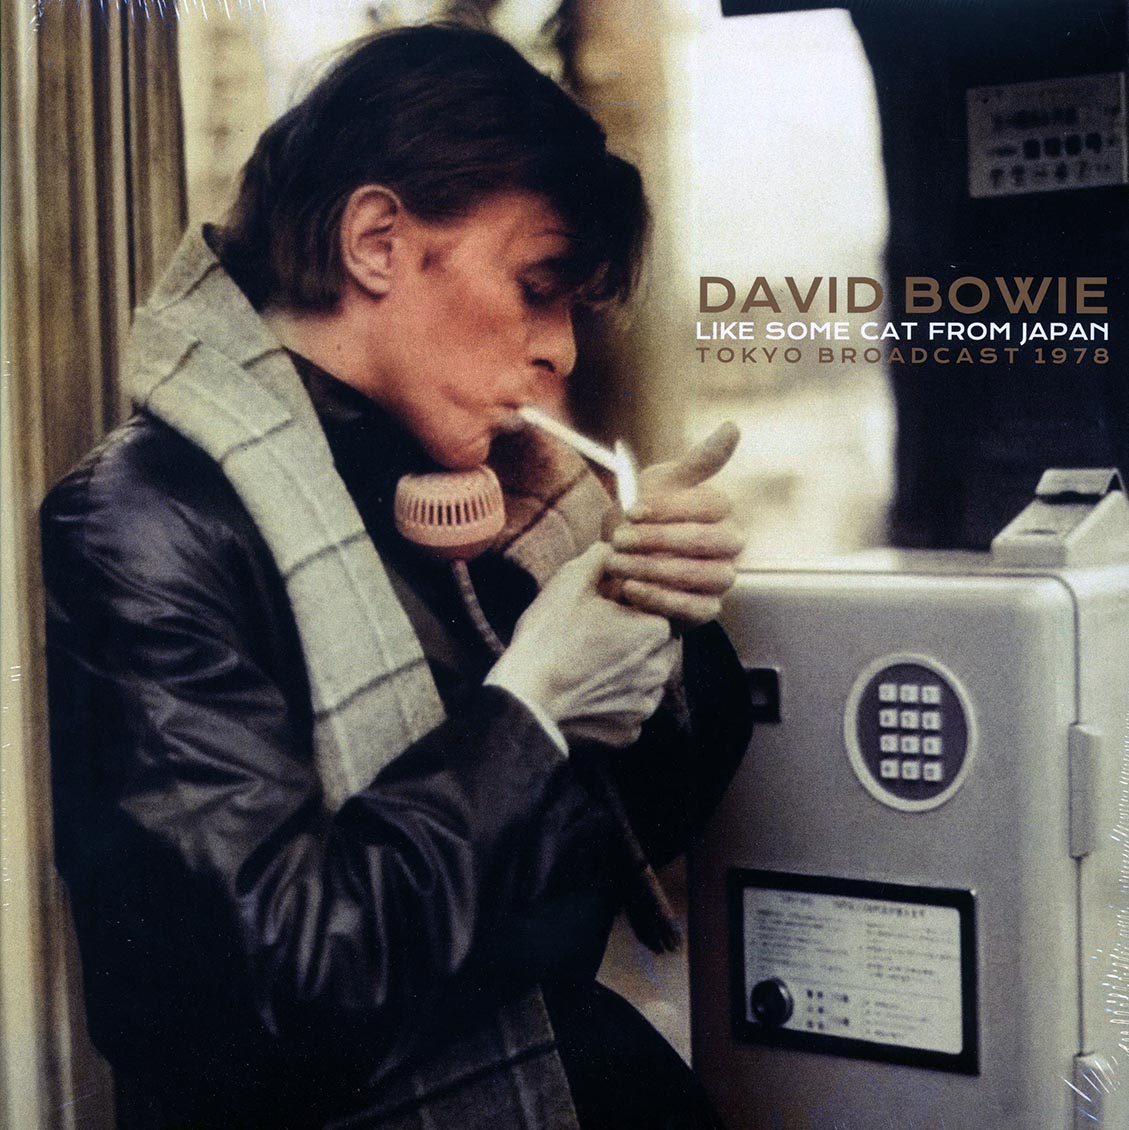 David Bowie - Like Some Cat From Japan: Tokyo Broadcast 1978 (2xLP) - Vinyl LP